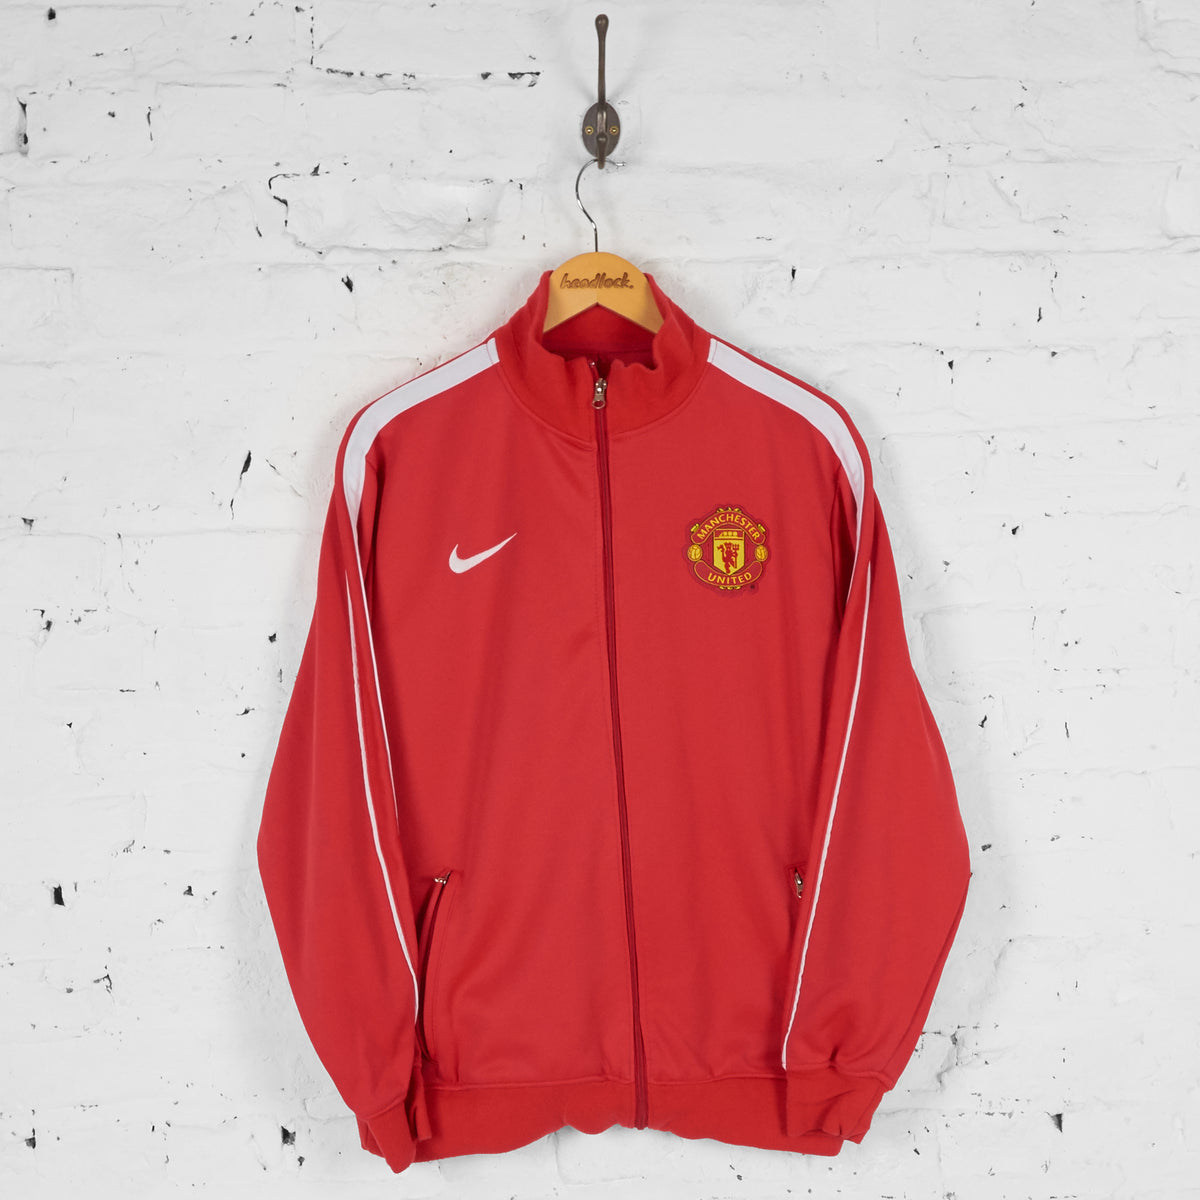 Manchester United Nike Tracksuit Top Jacket - Red - XL – Headlock